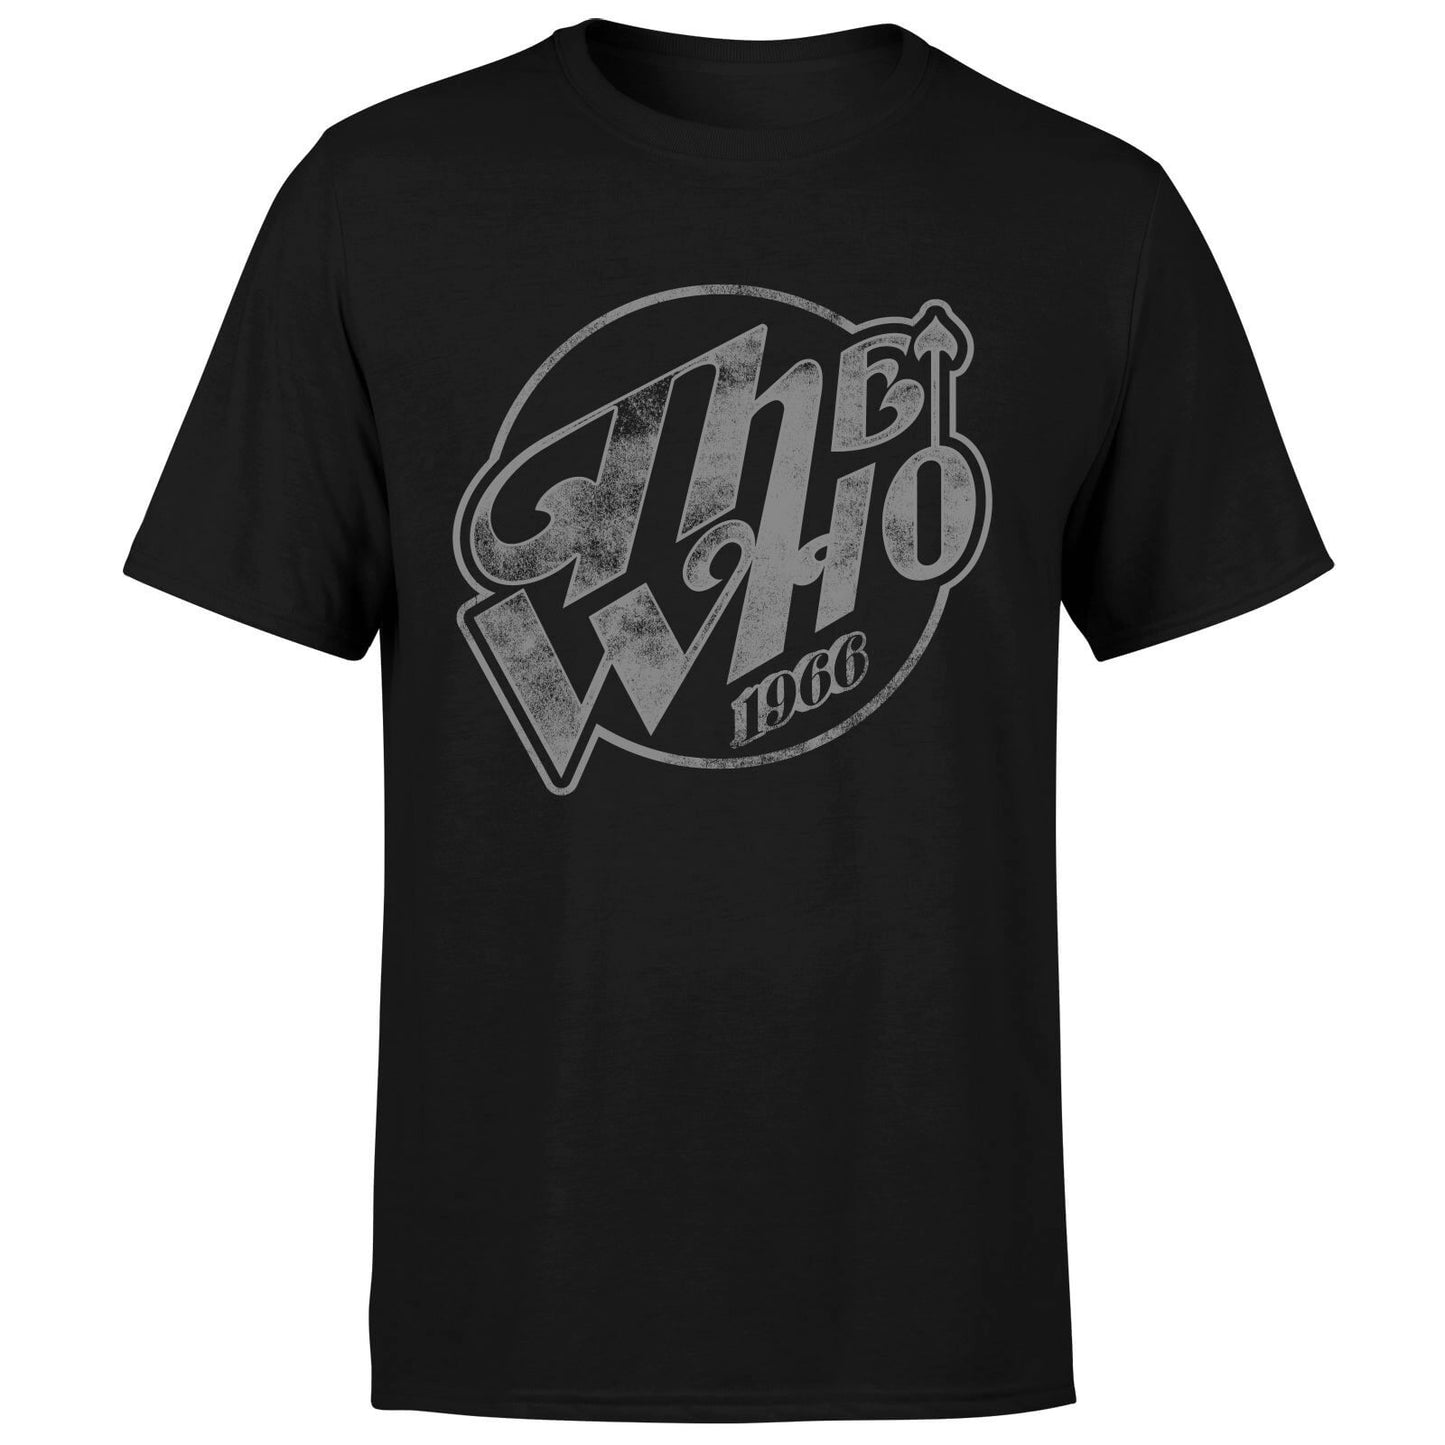 The Who 1966 Men's T-Shirt